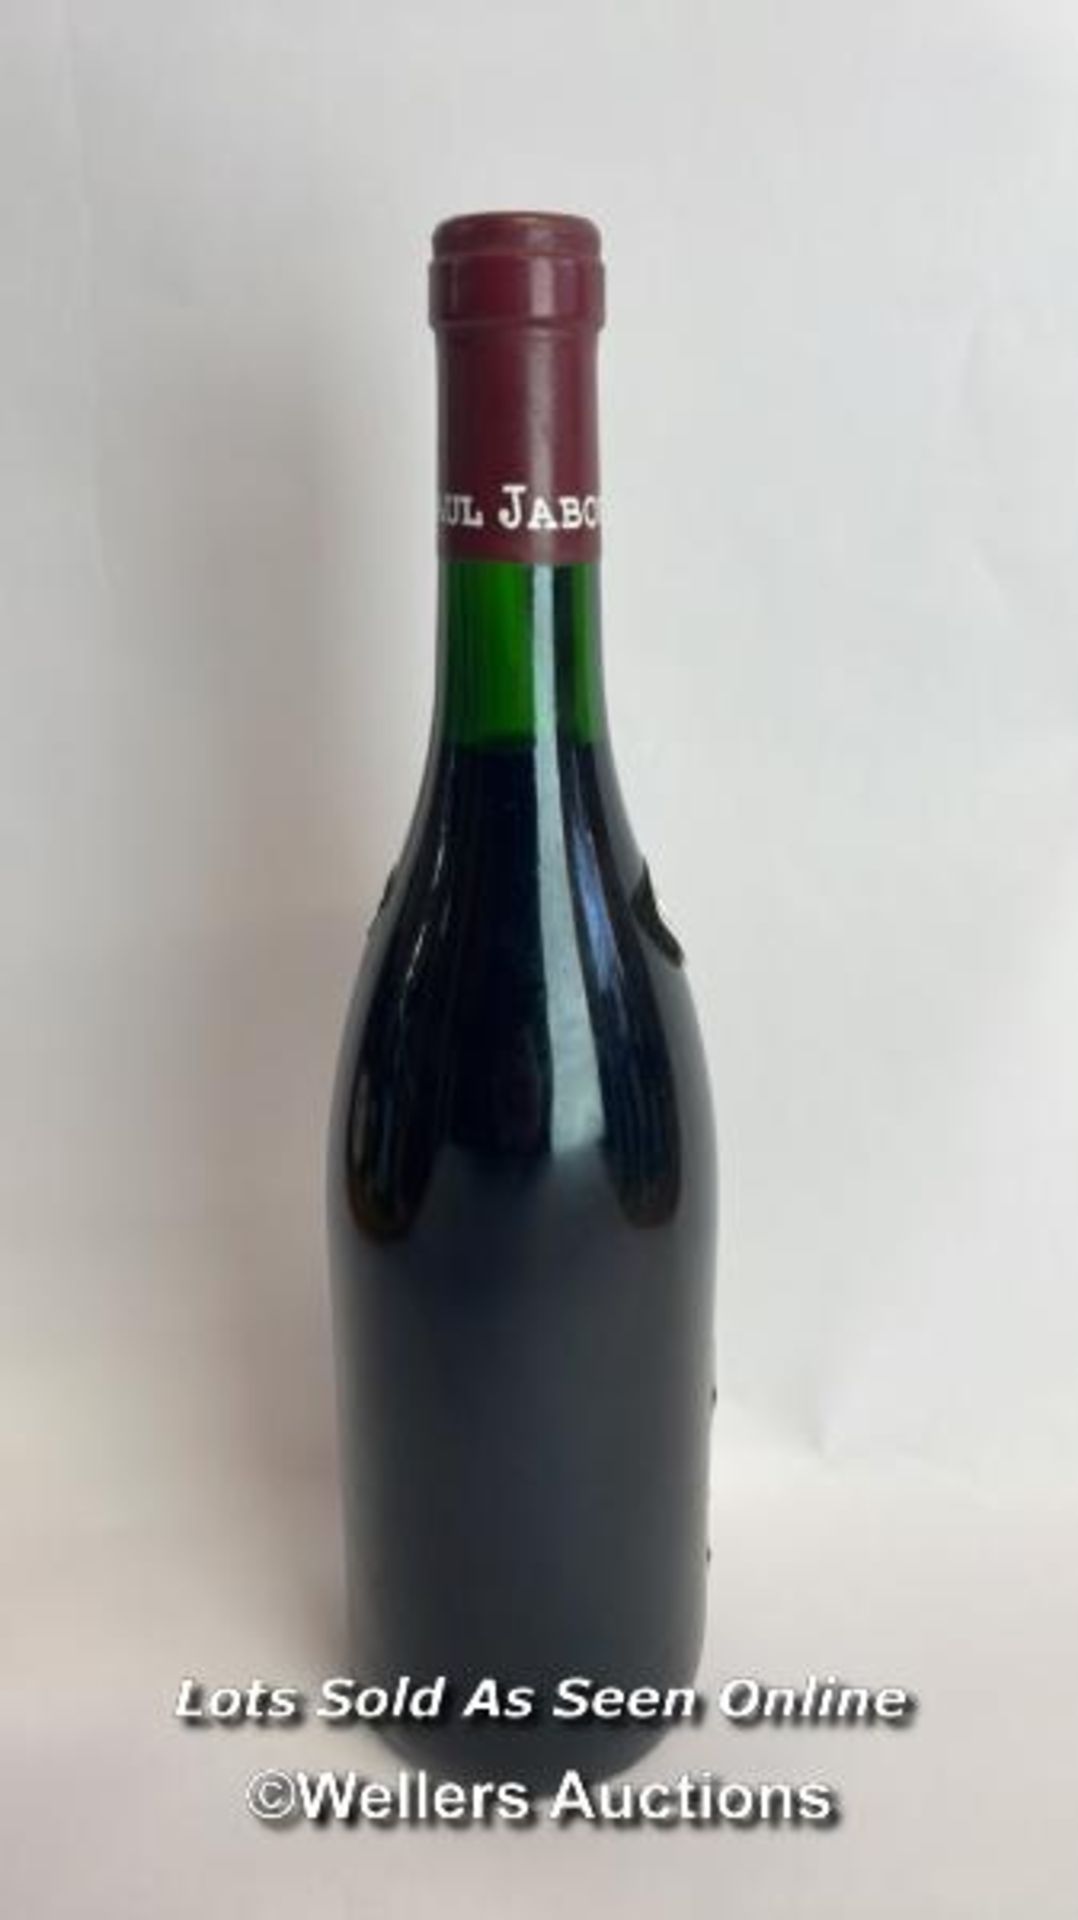 1988 Vintage Crozes Hermtage Paul Jaboulet Aine, 75cl, 12.5% vol / Please see images for fill - Image 7 of 7